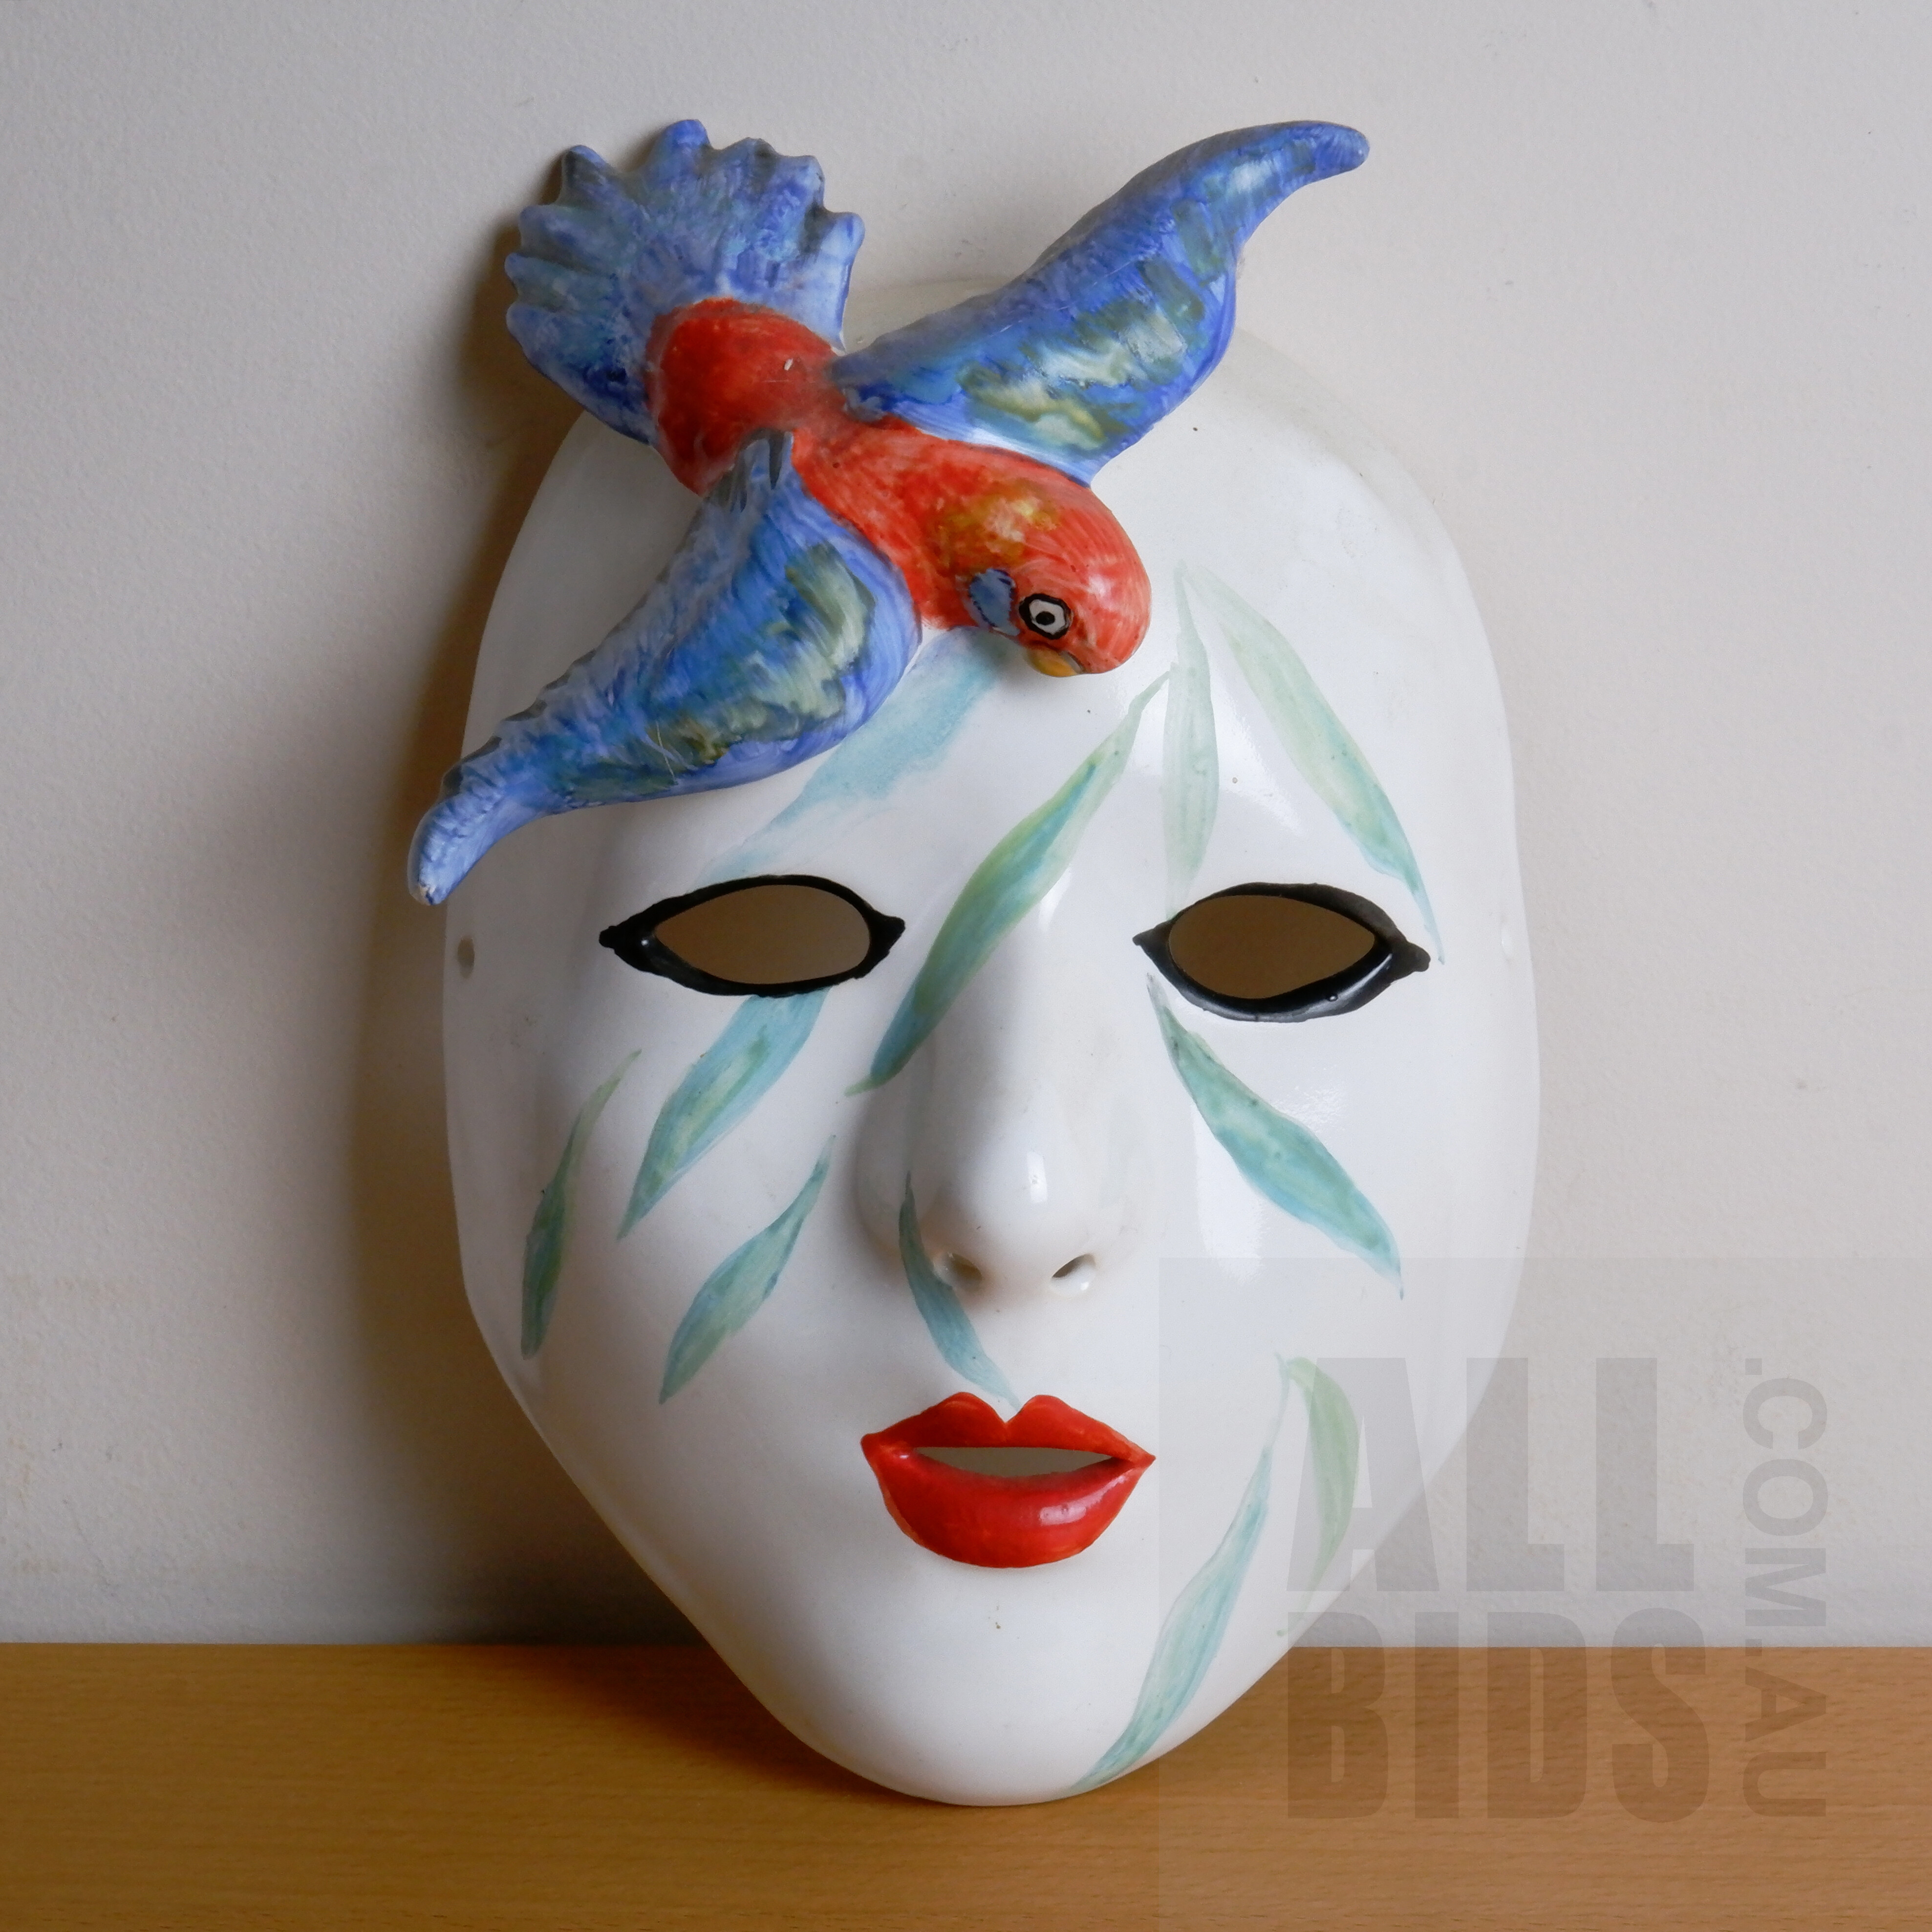 'Attributed to Barbara Swarbrick (England/ Australia 1945-) Painted Porcelain Mask with Rosella'